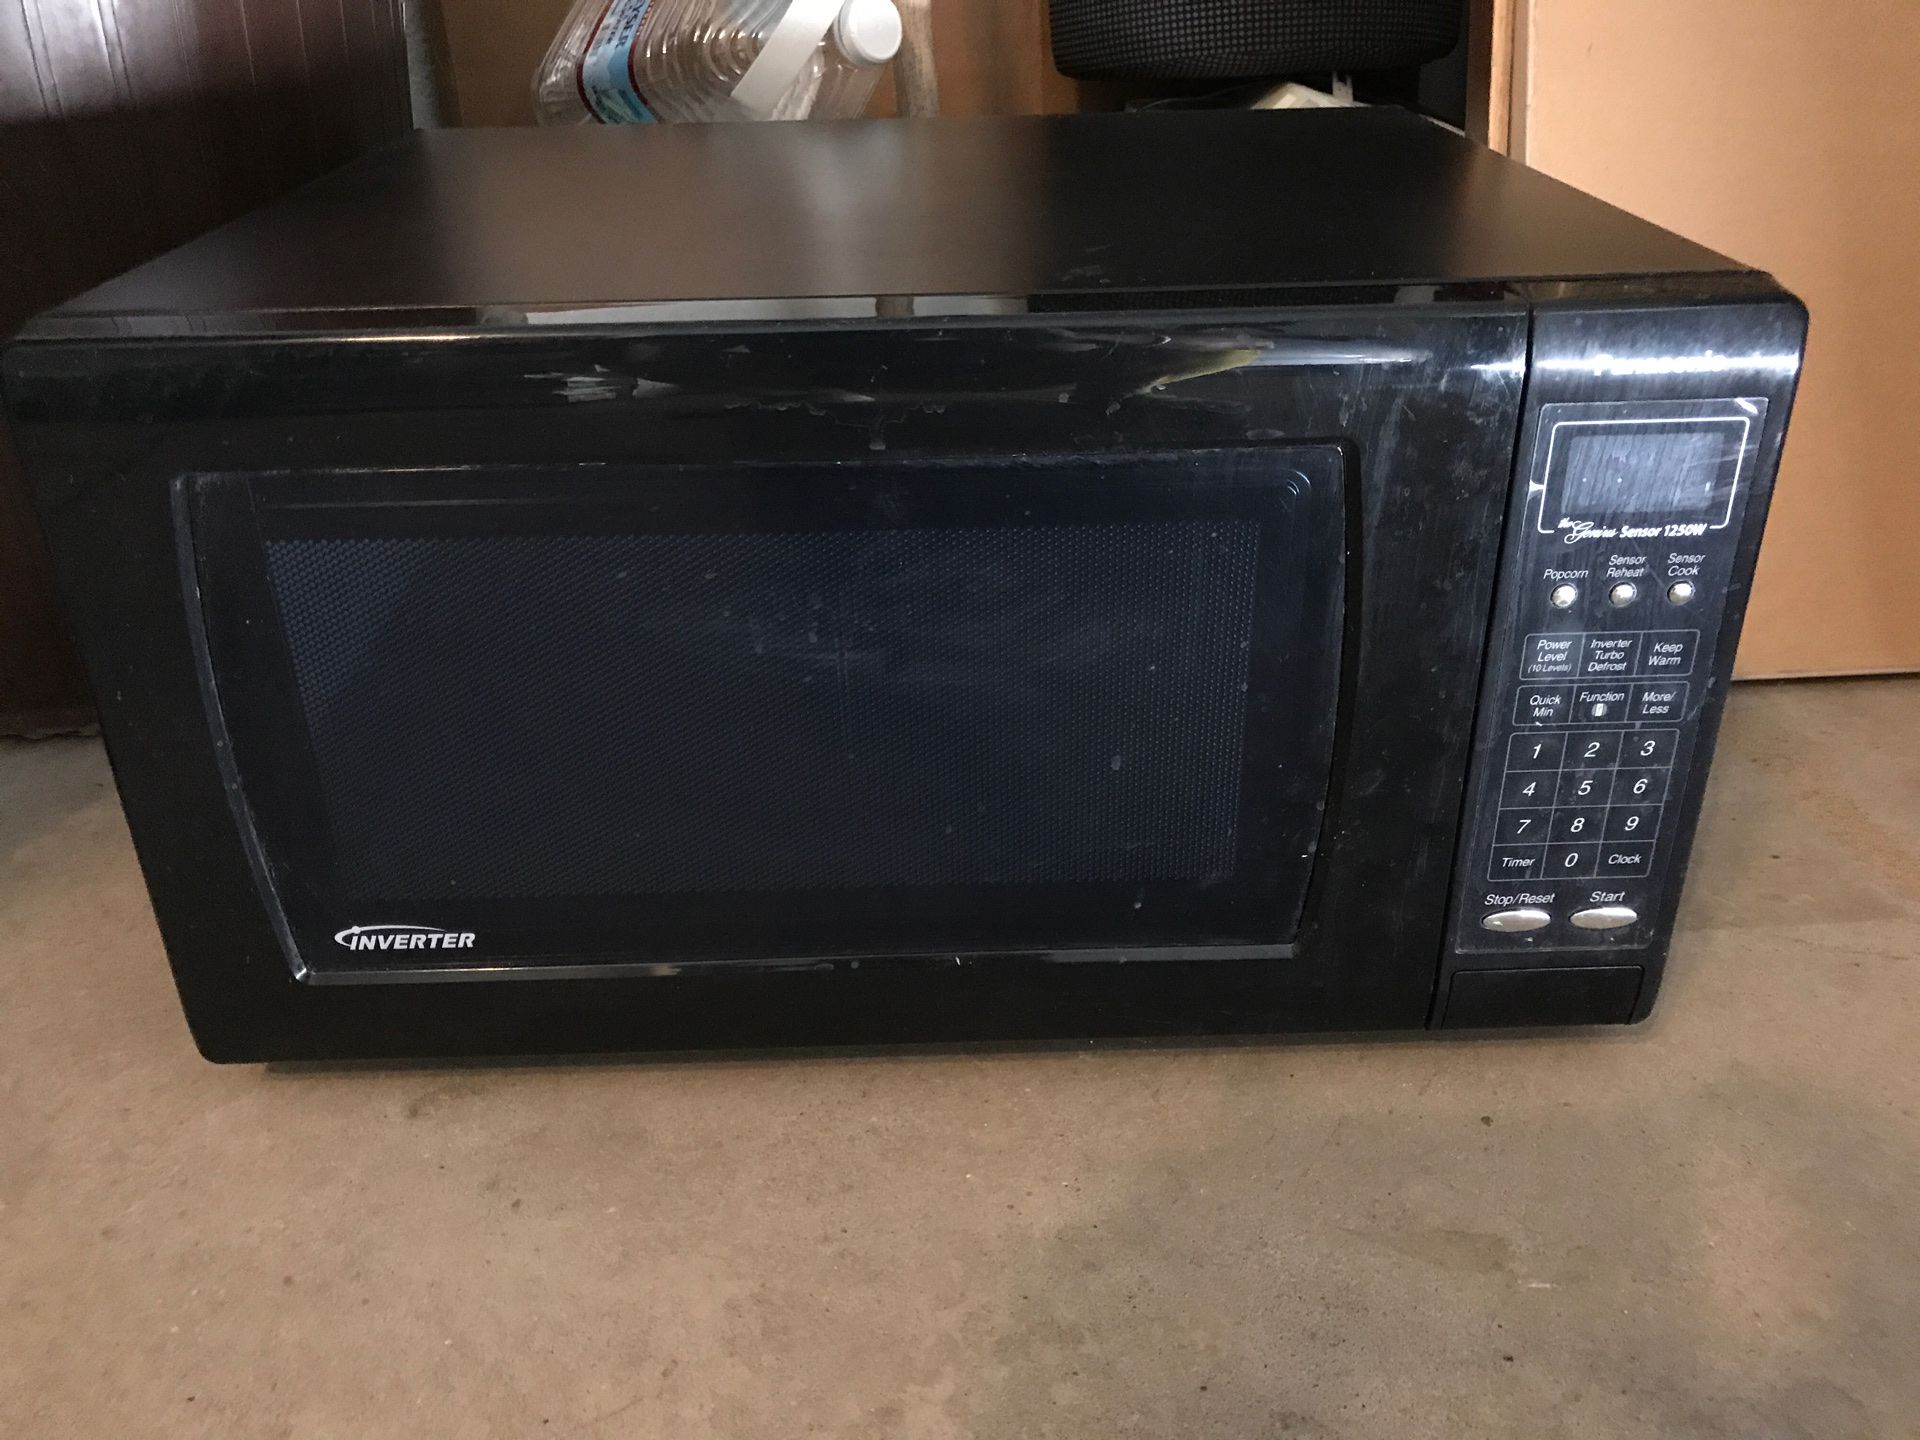 Panasonic microwave oven in very good condition.